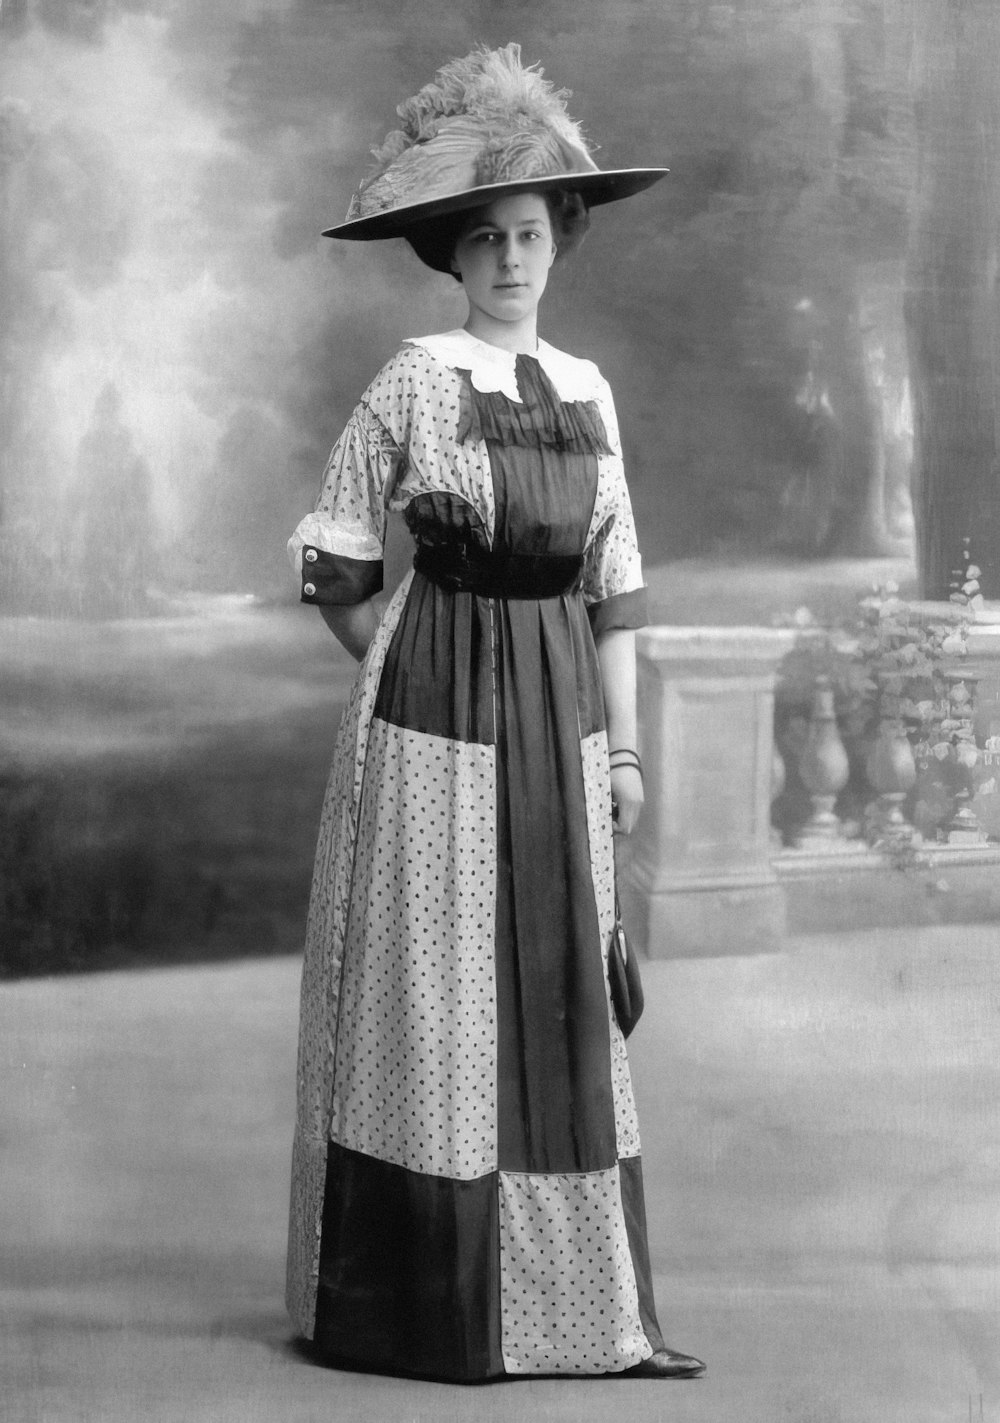 a black and white photo of a woman in a dress and hat